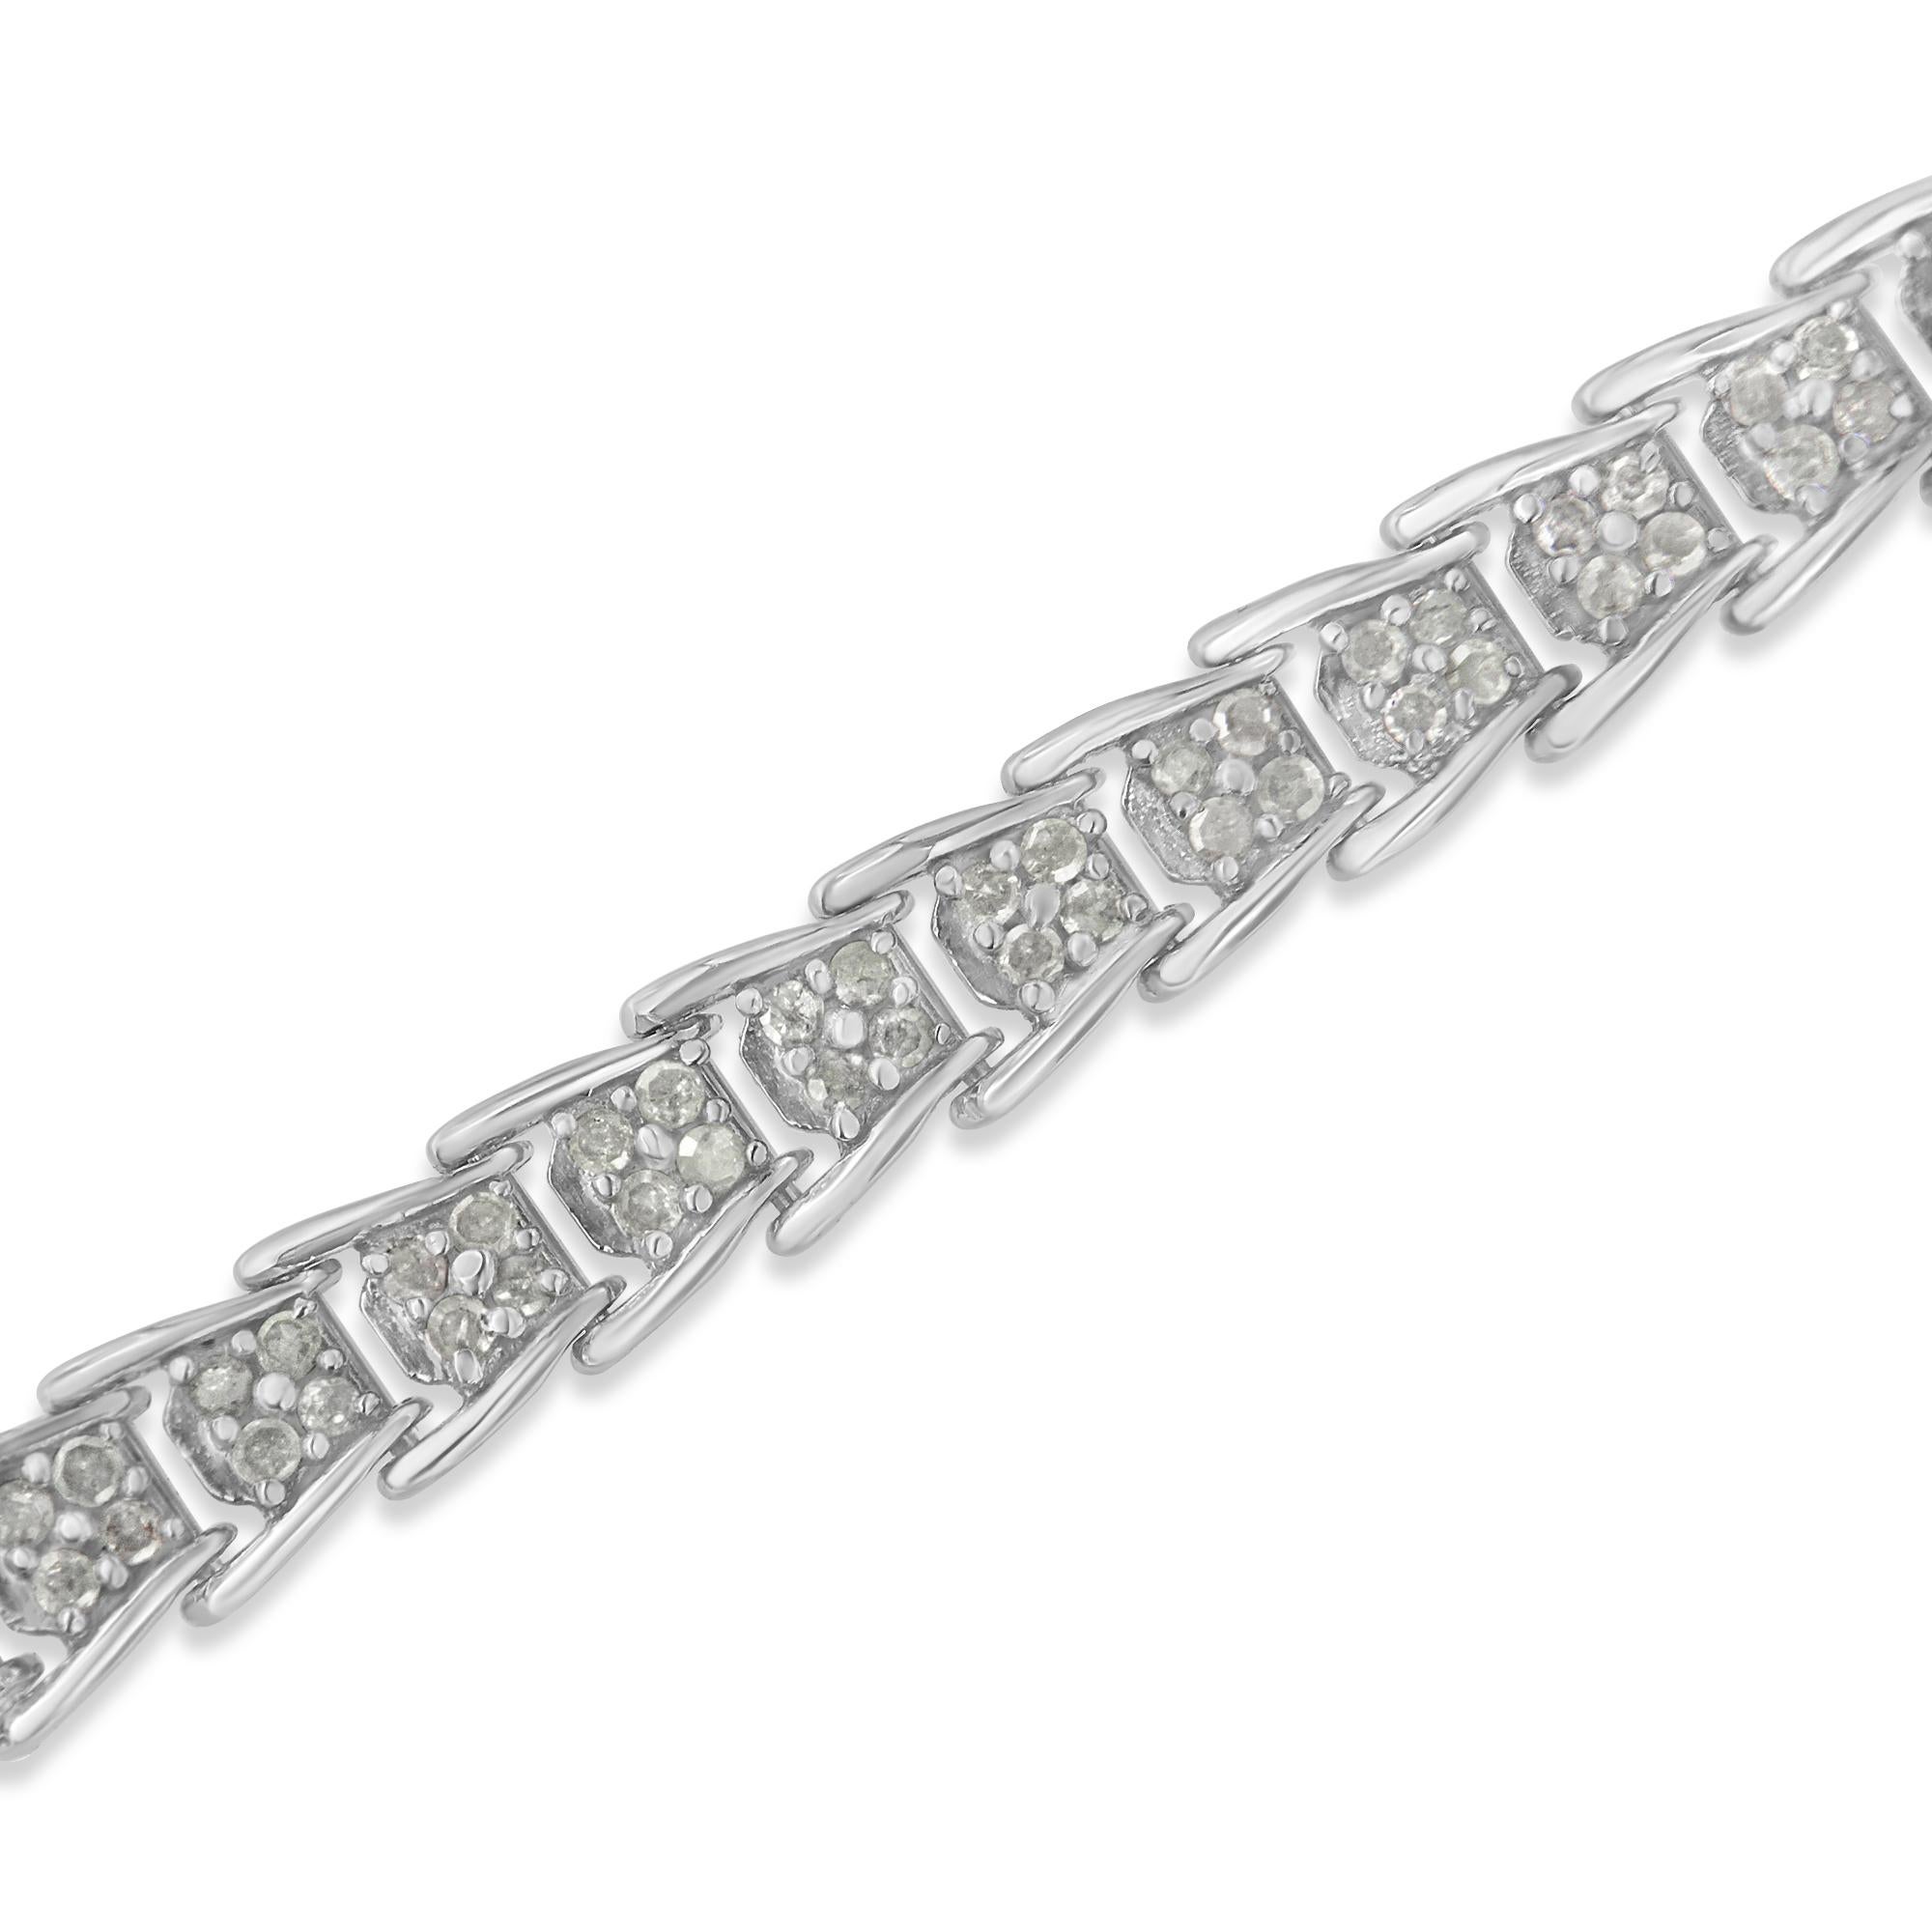 10K White Gold 2.0 Carat Diamond Fan-Shaped Link Tennis Bracelet In New Condition For Sale In New York, NY